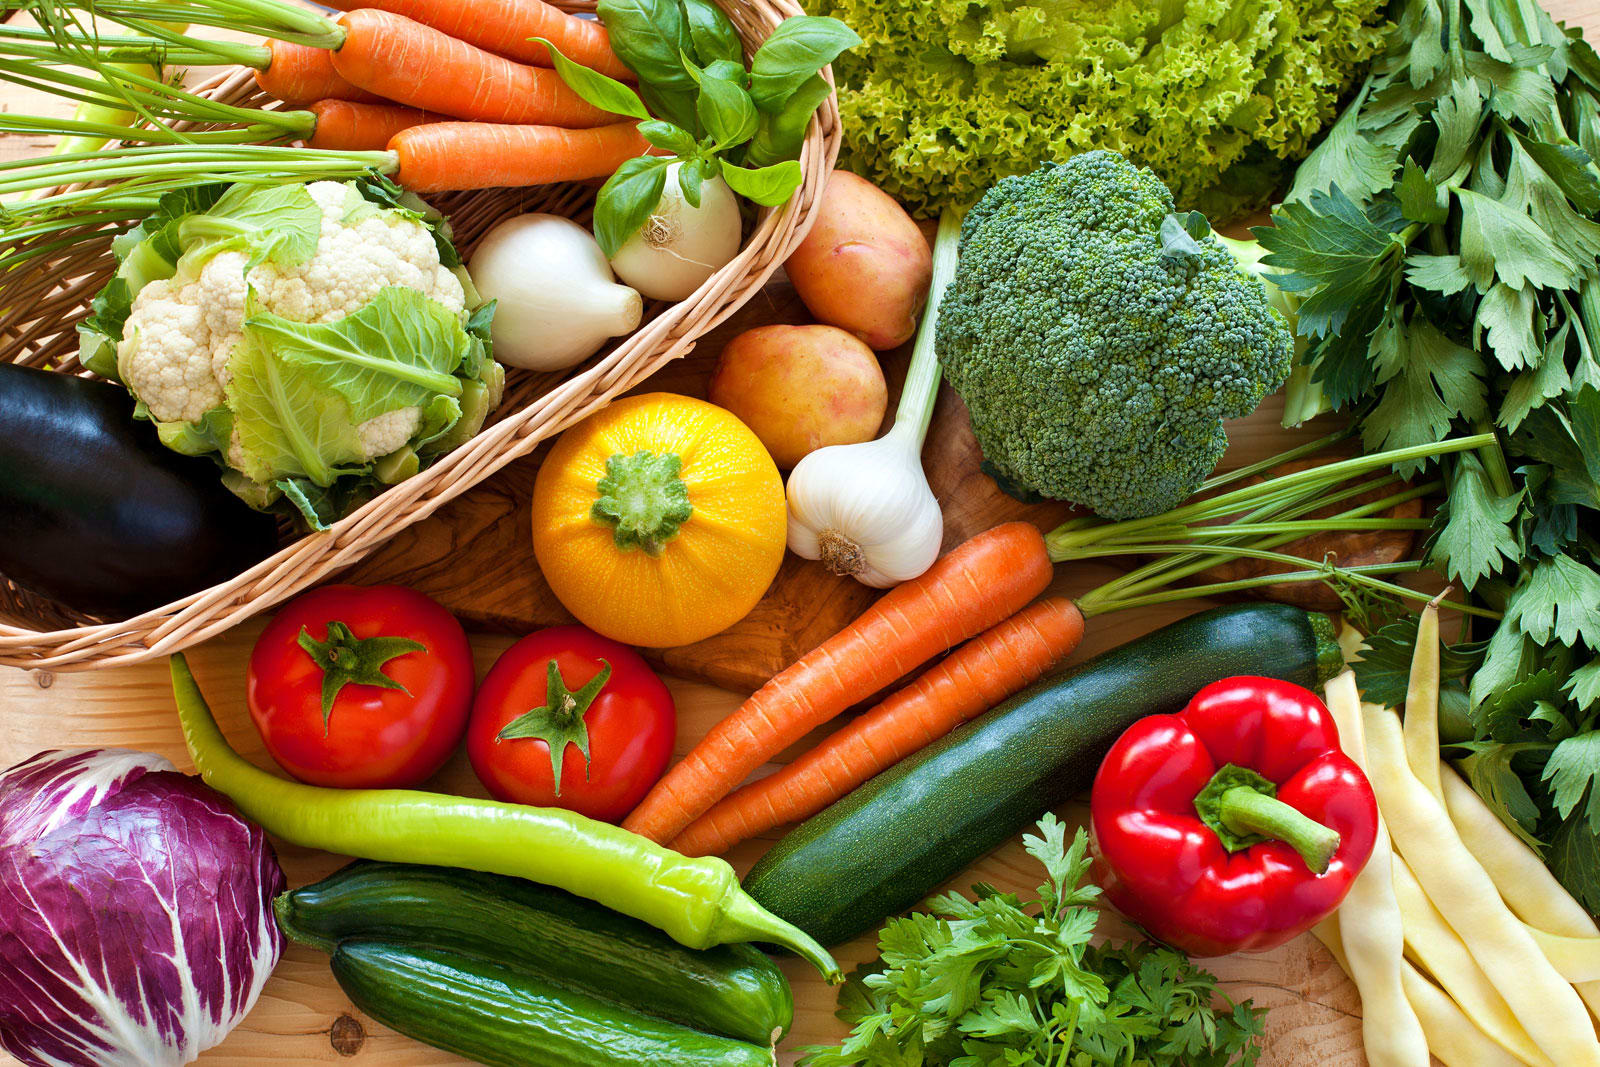 Key factors that influence Online Vegetable Shopping